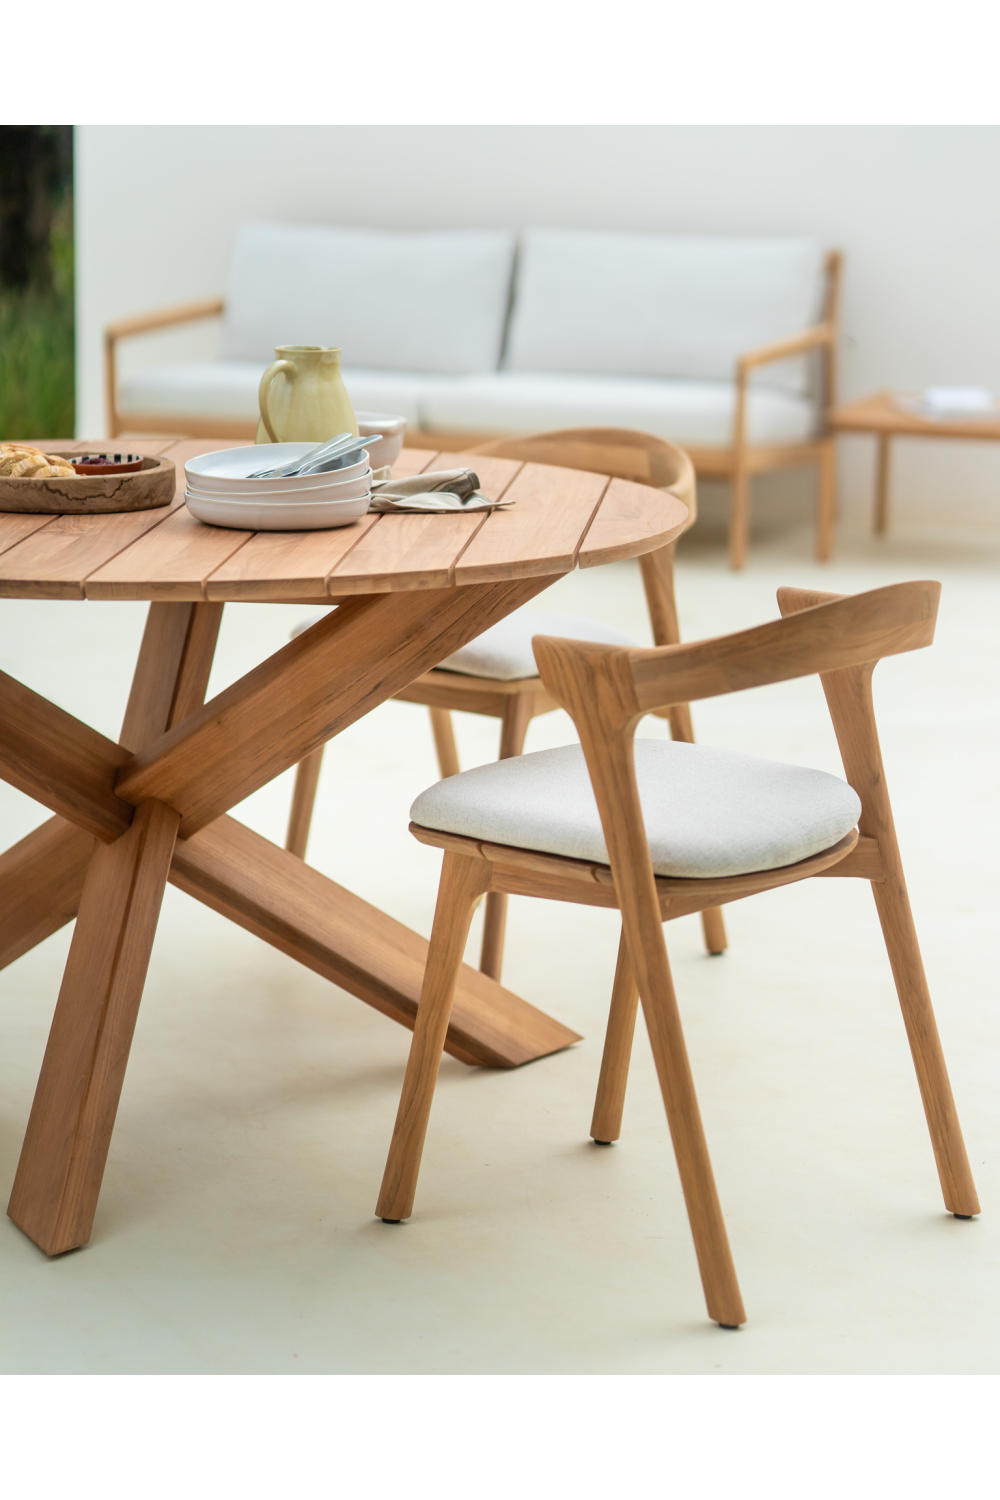 Solid Teak Outdoor Dining Table | Ethnicraft Circle | OROA.com